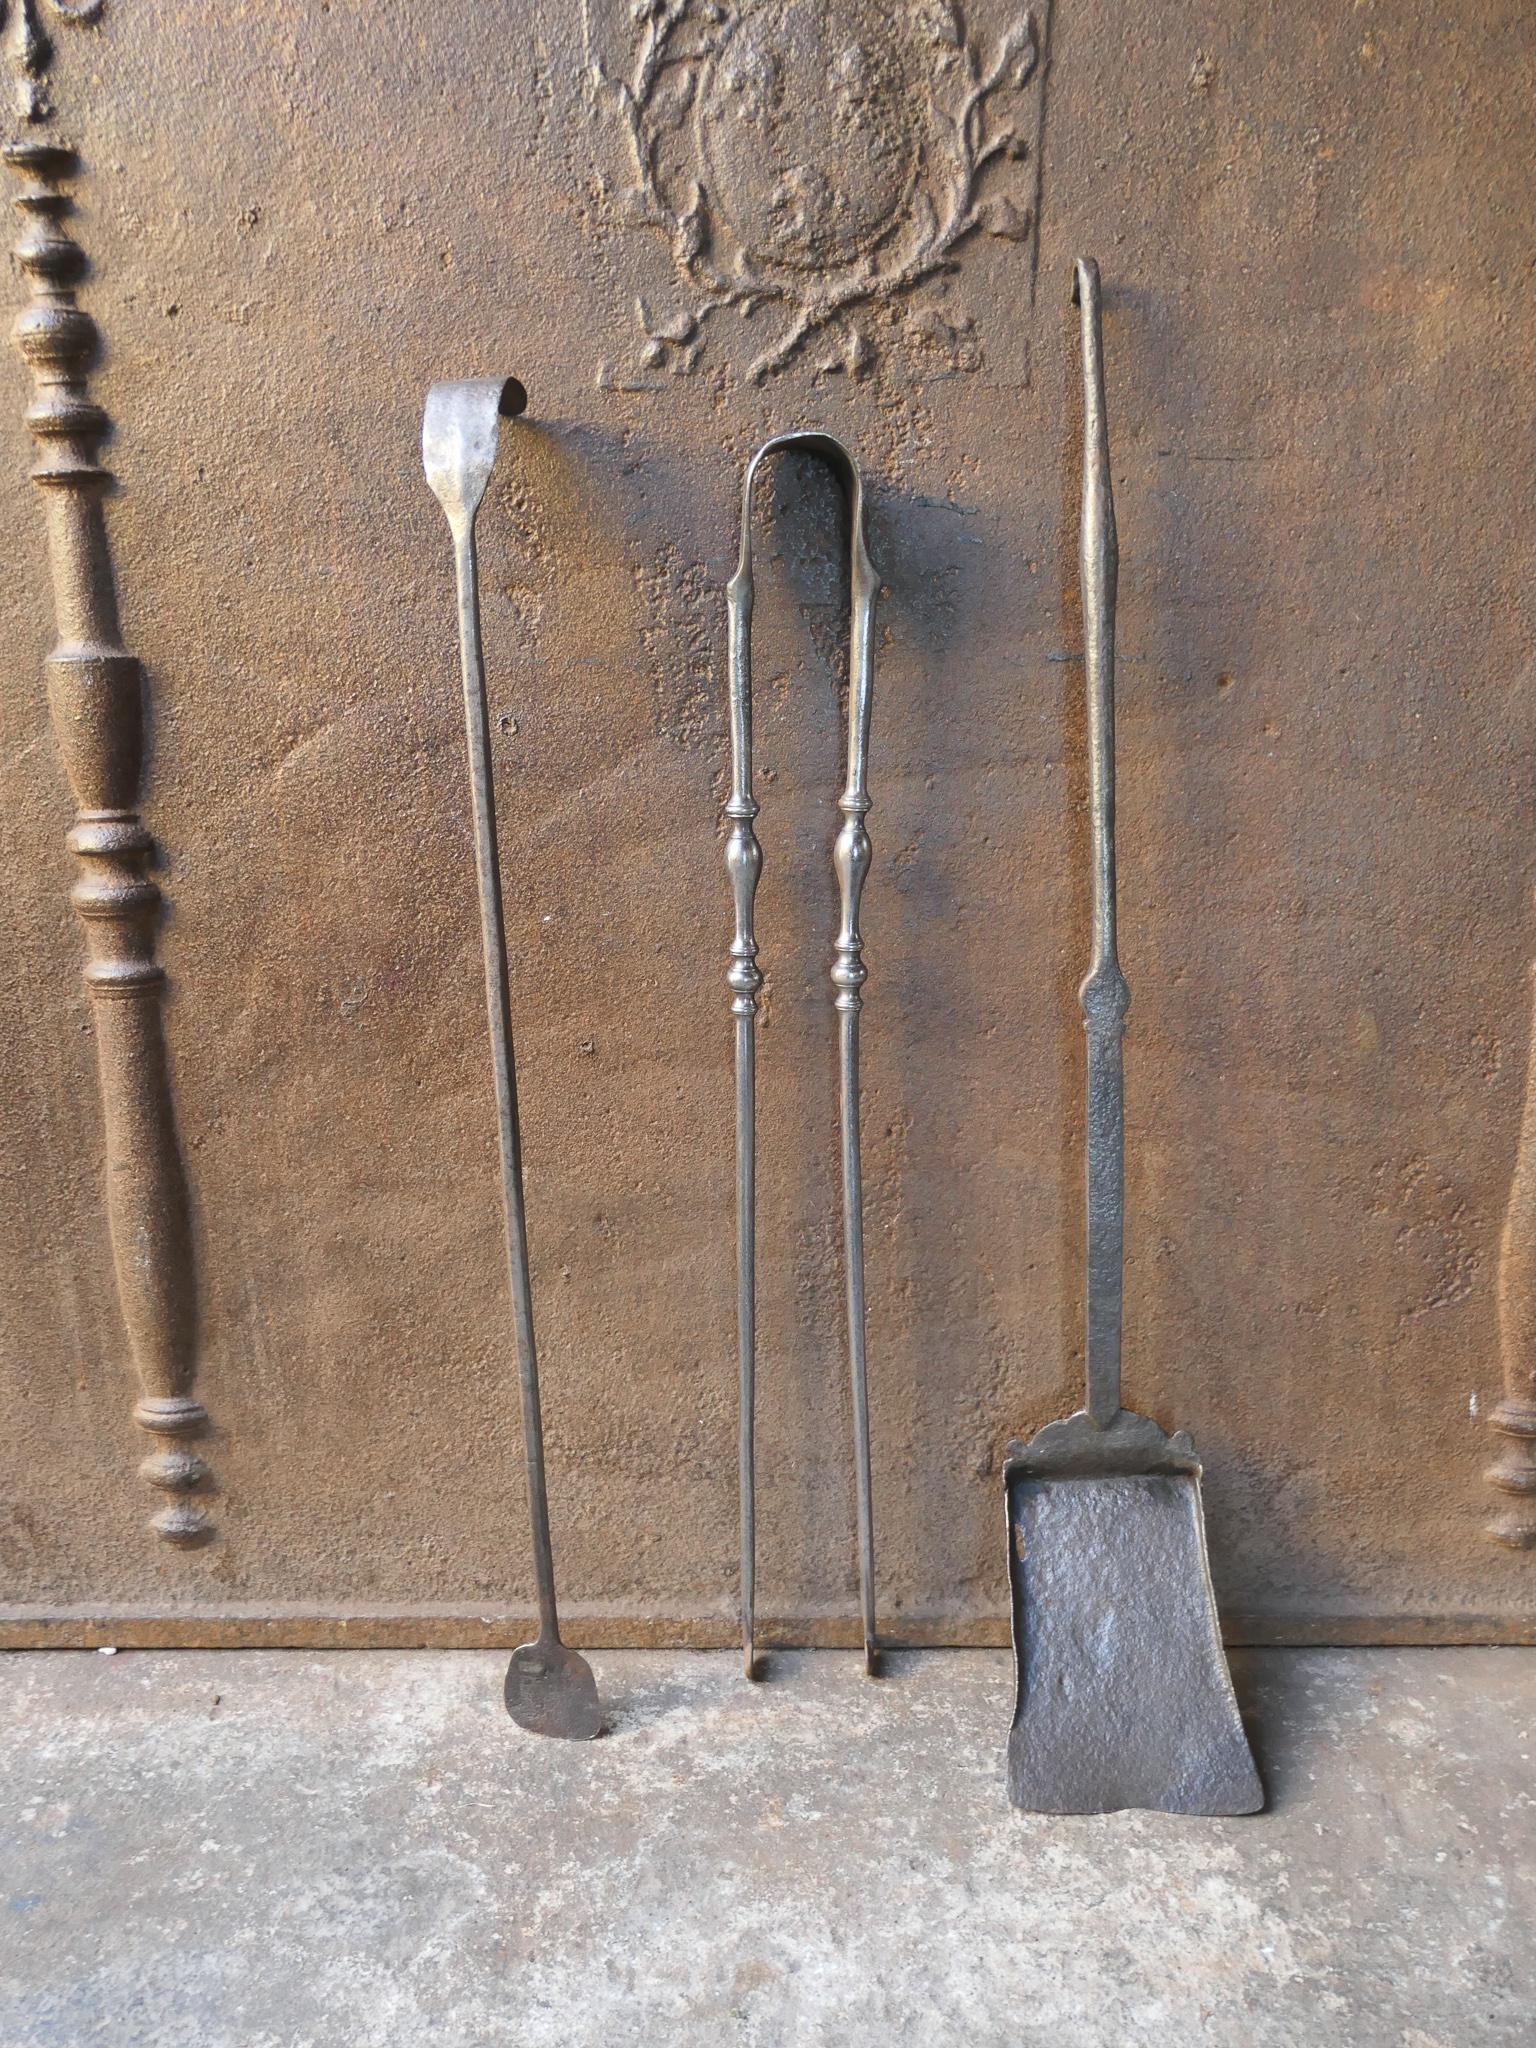 Antique 18th century French Louis XV period fireside companion set. The tool set consists of tongs, shovel and poker. Made of wrought iron. It is in a good condition and is fully functional.